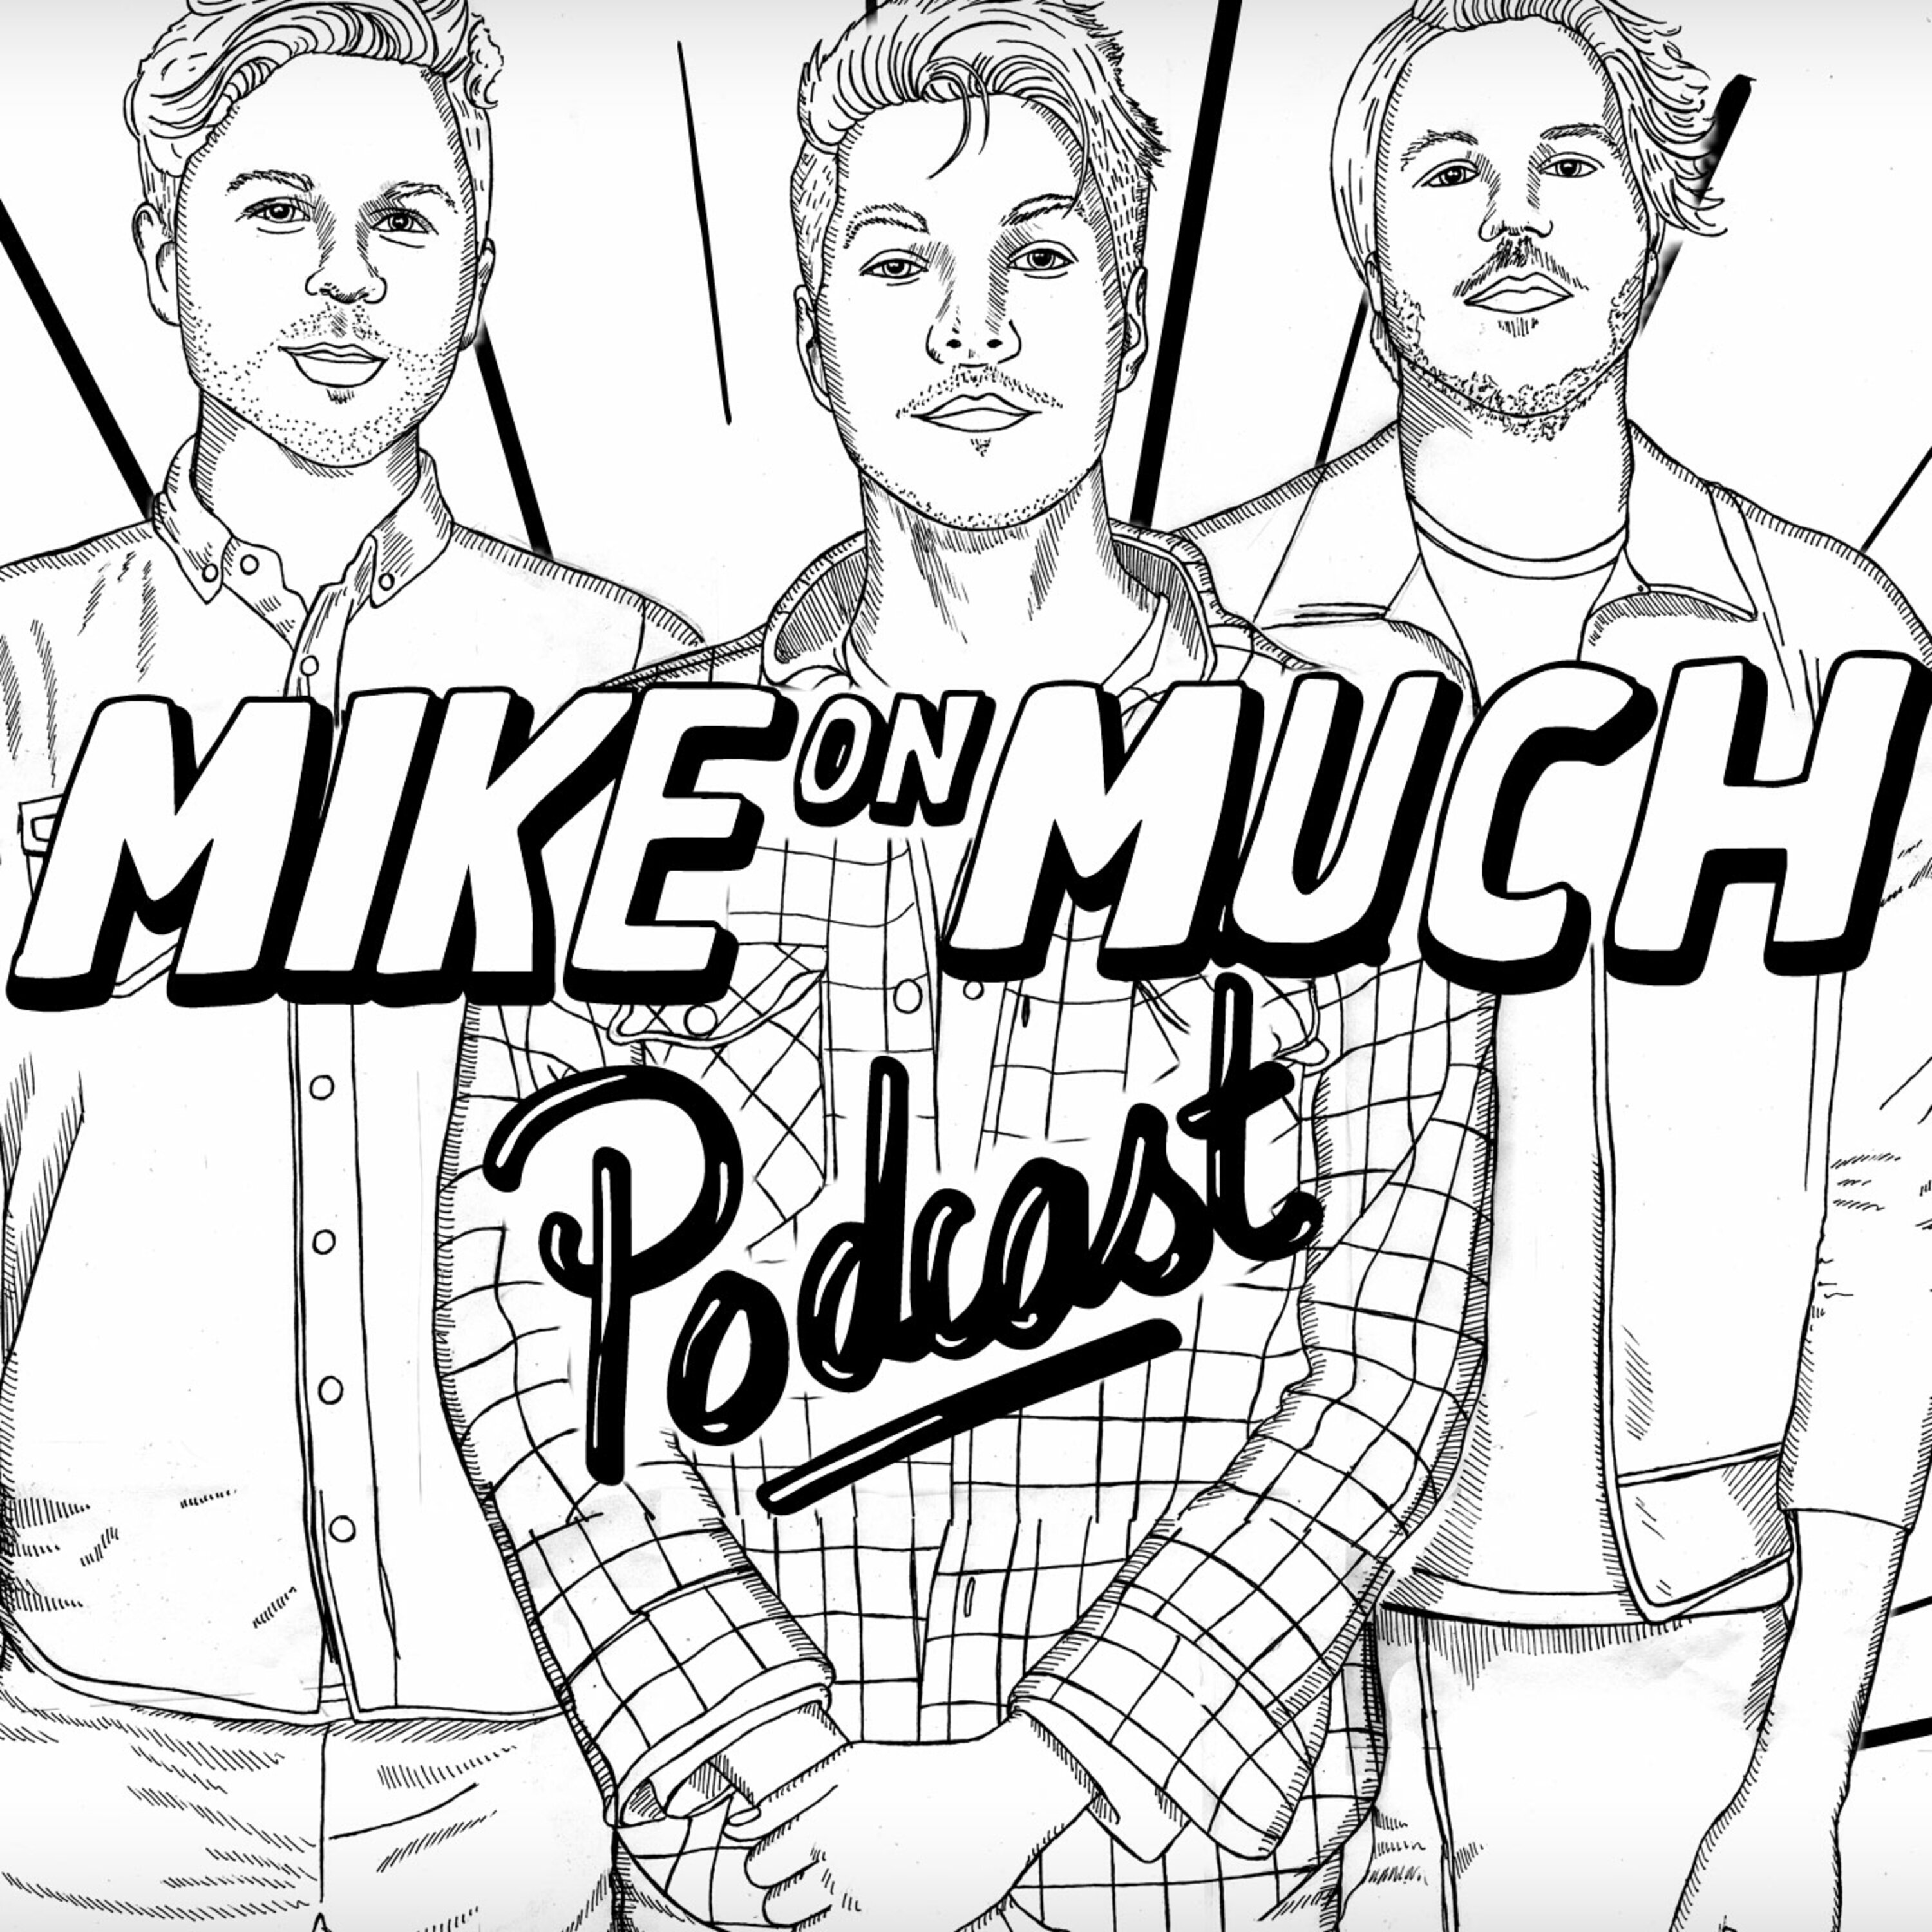 Season 1 Mike On Much: “You Have Time To Work Out All The Time” - Post Election Special